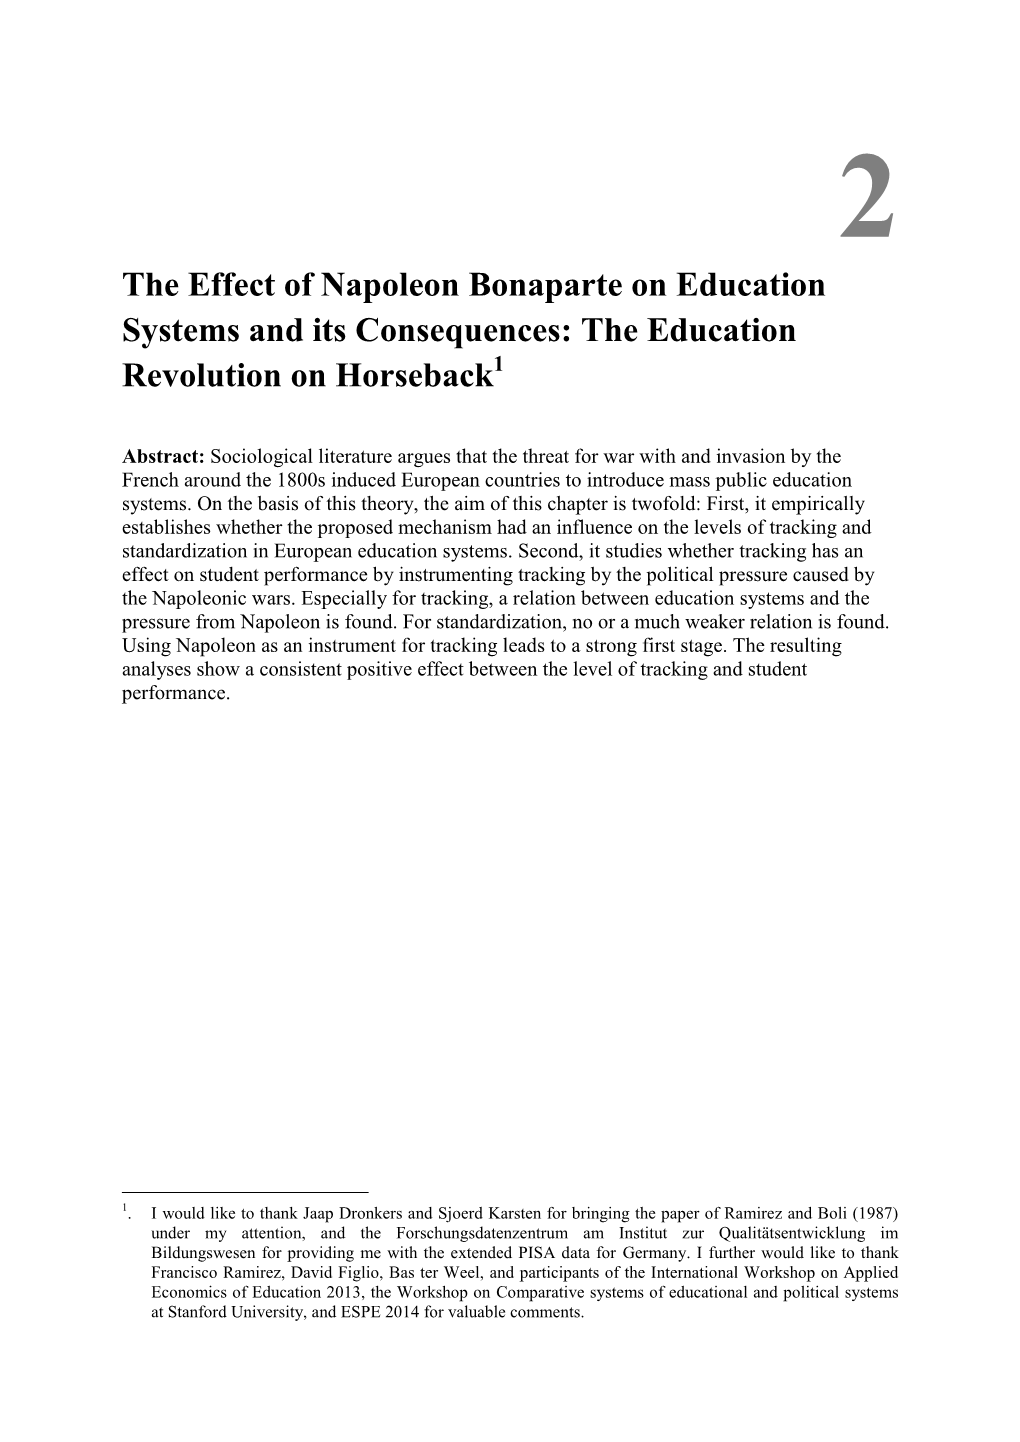 The Effect of Napoleon Bonaparte on Education Systems and Its Consequences: the Education Revolution on Horseback1